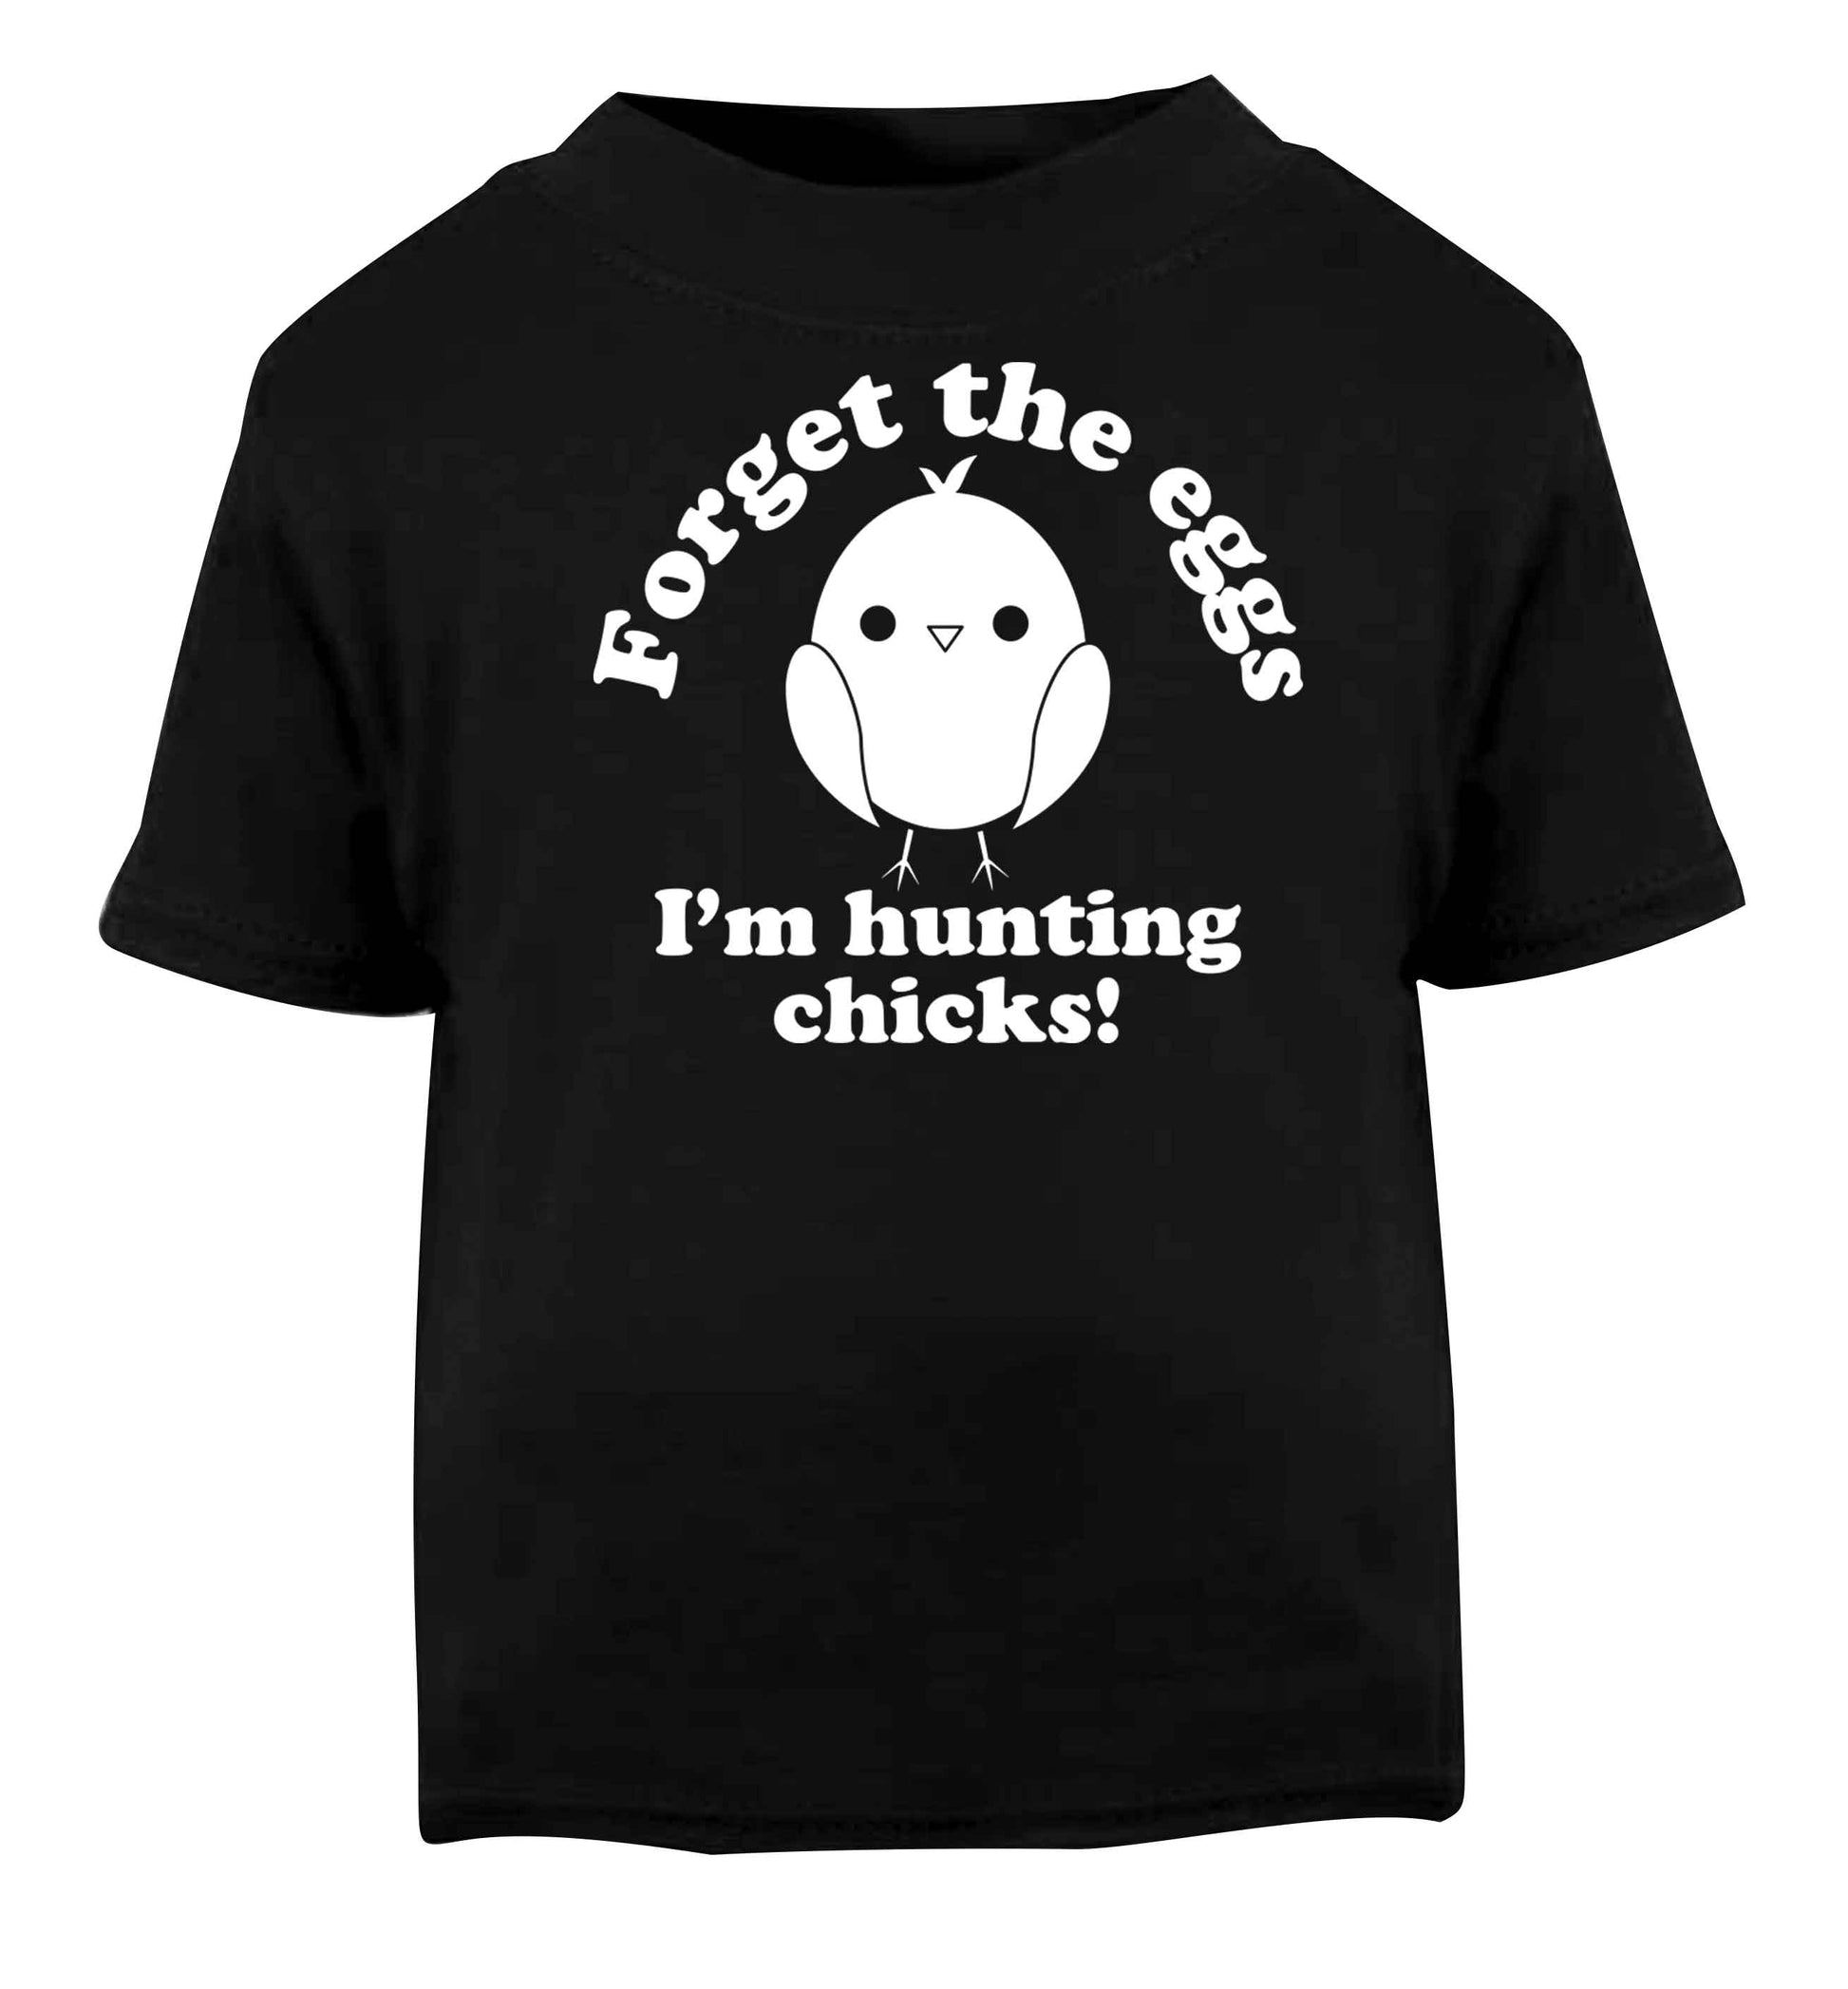 Forget the eggs I'm hunting chicks! Black baby toddler Tshirt 2 years